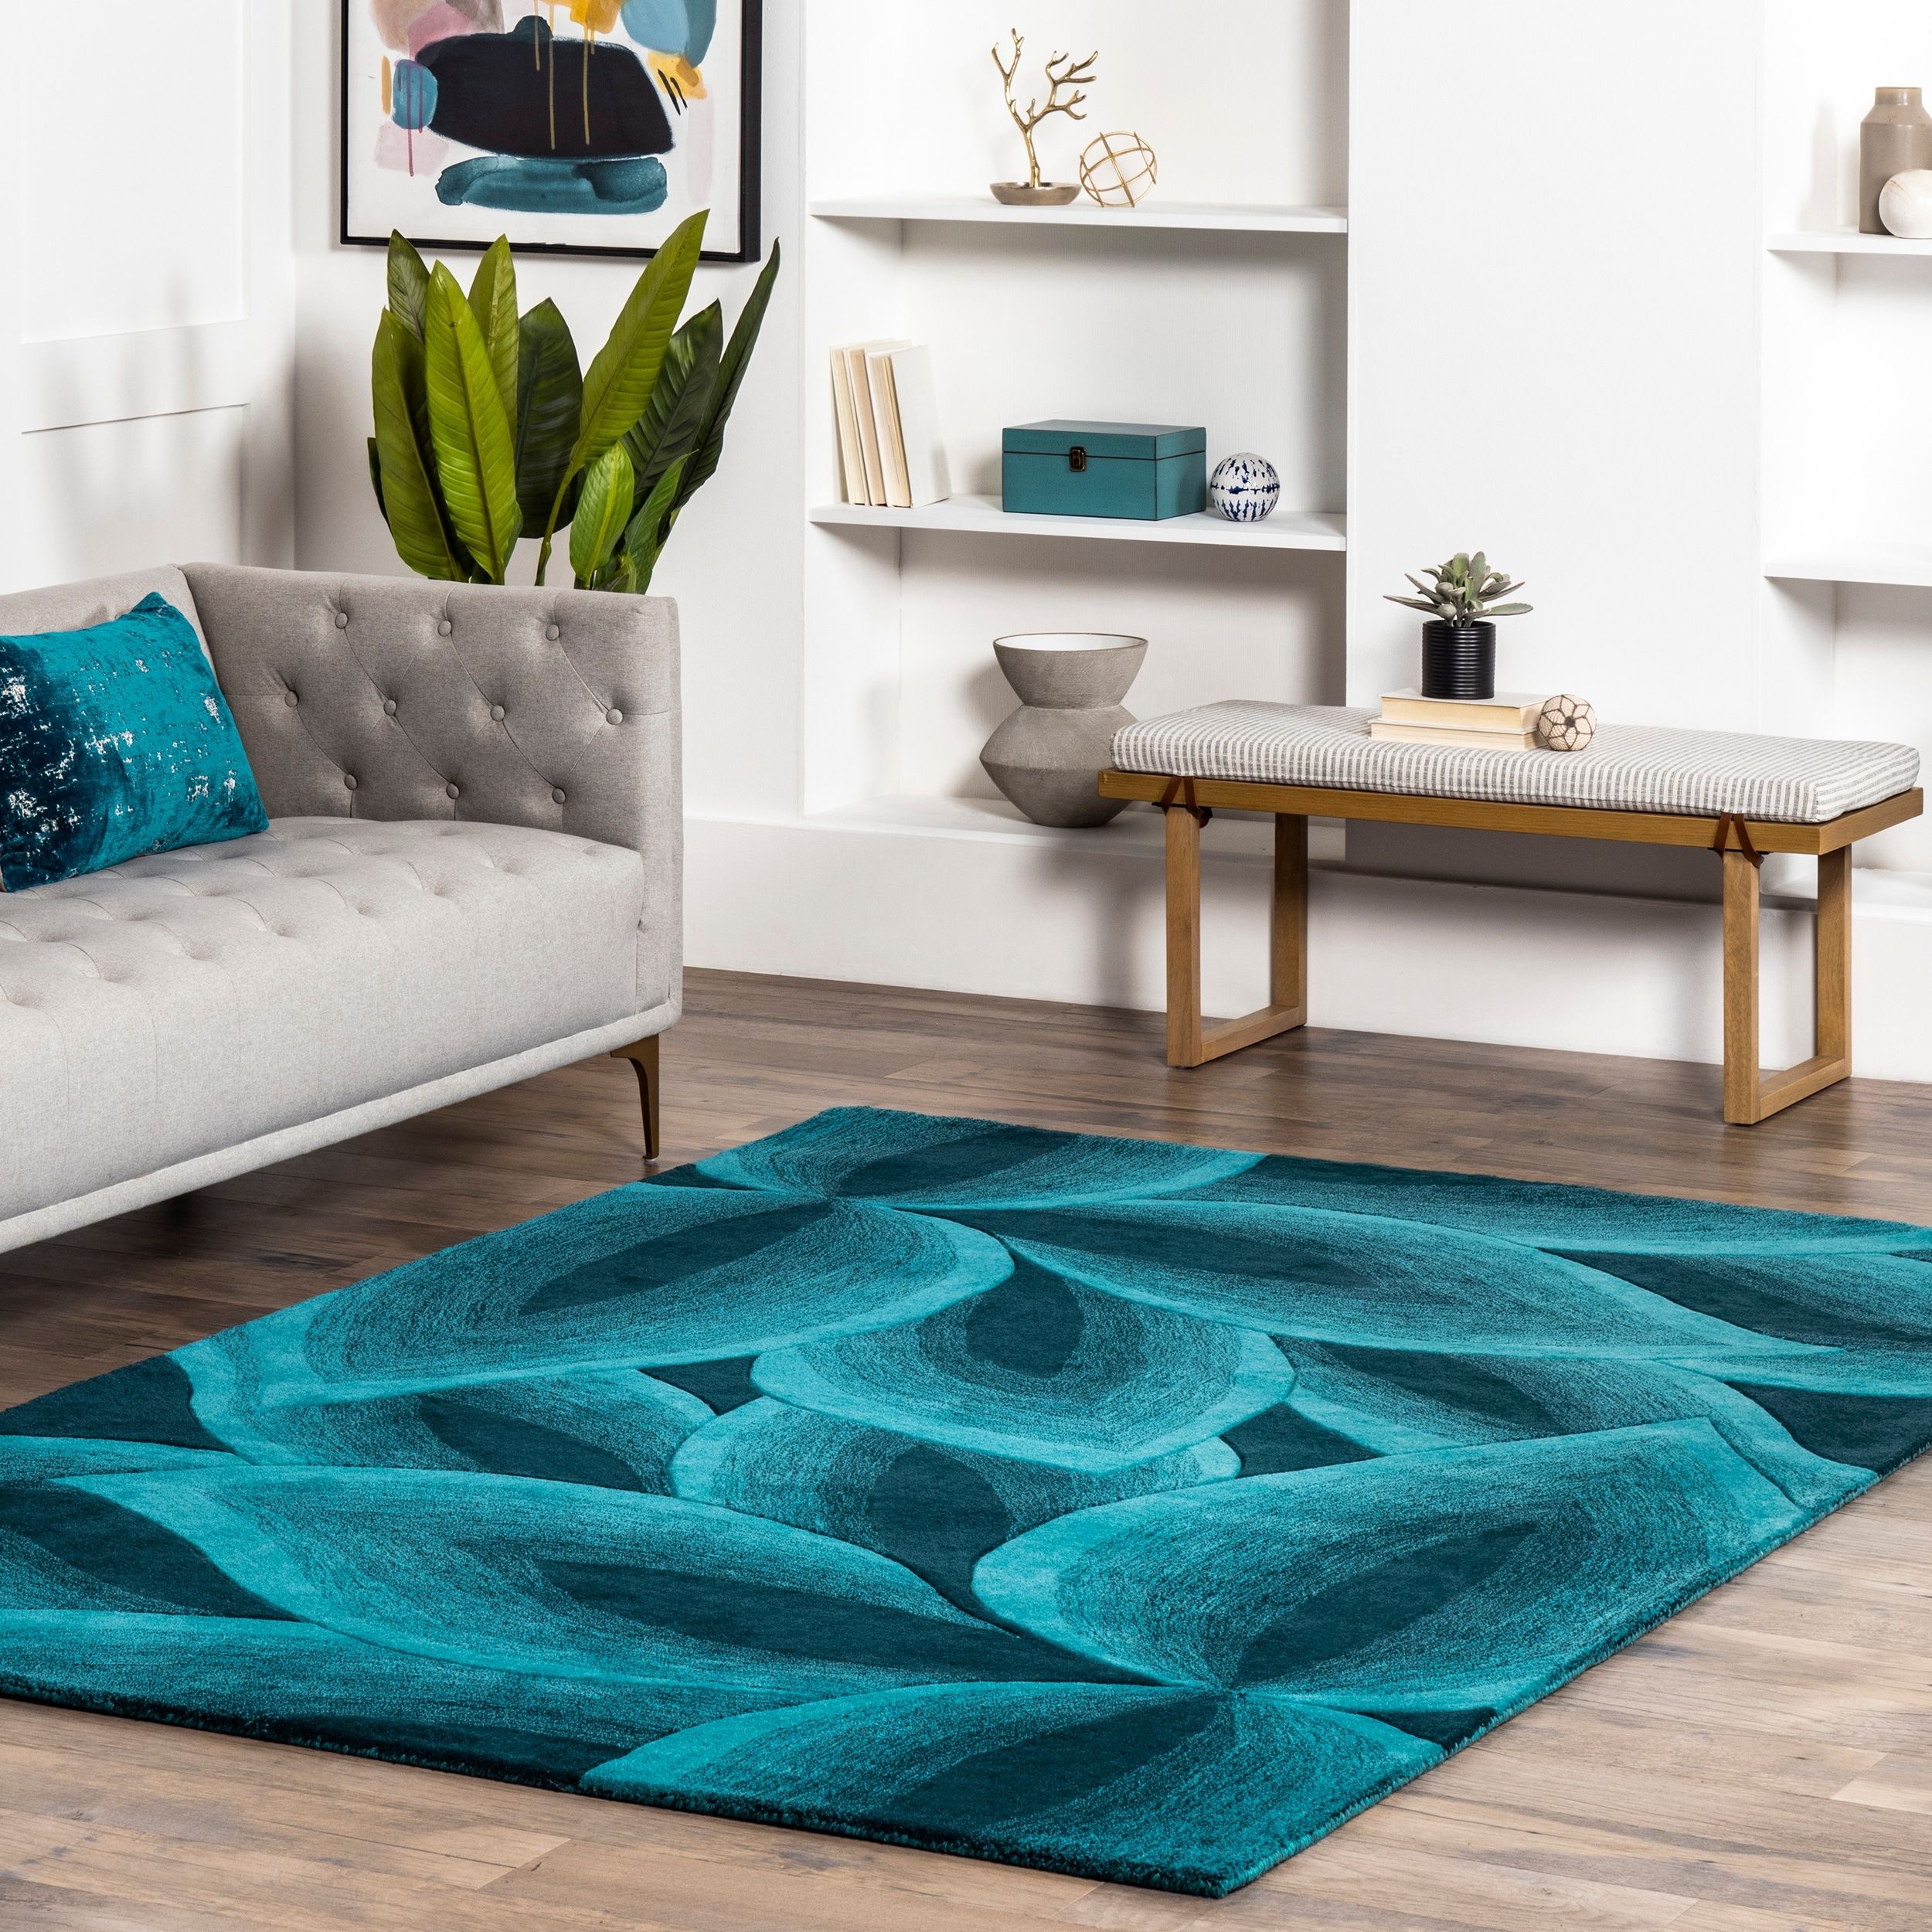 Nuloom Turquoise Handmade Leaves Wool Area Rug – Overstock – 7344098 Within Turquoise Rugs (Photo 7 of 15)